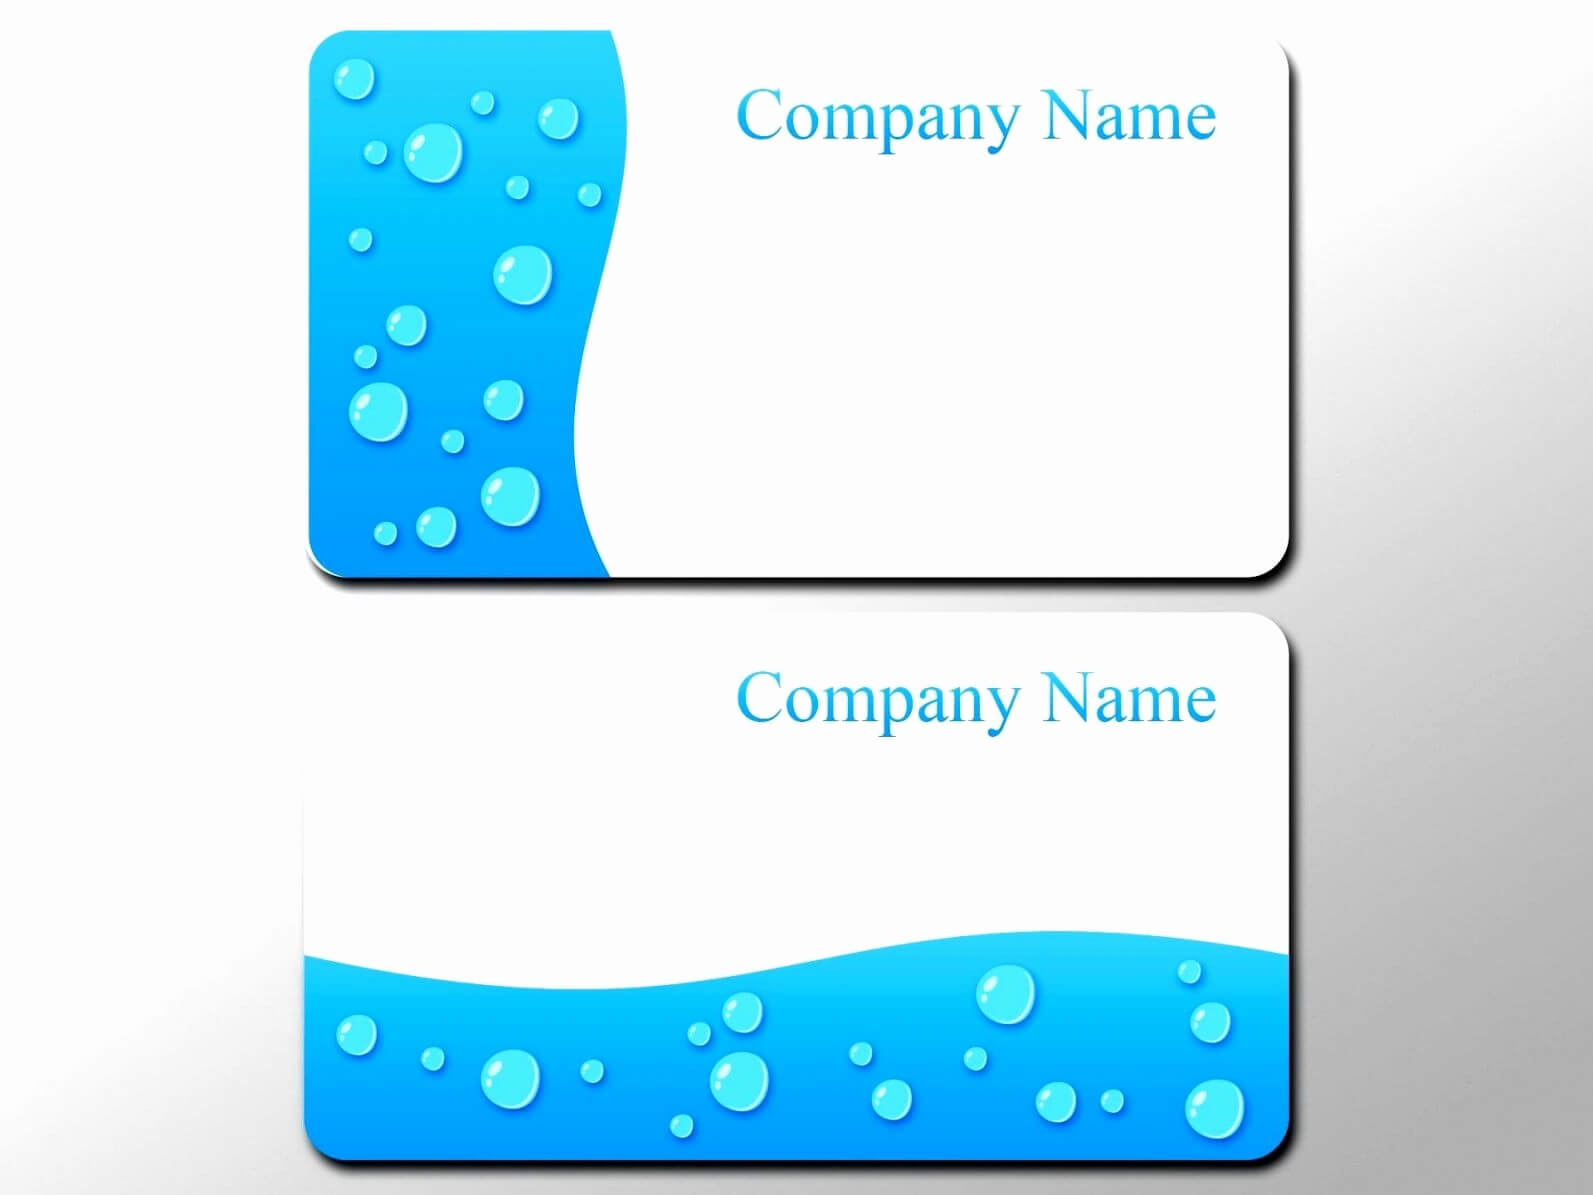 Business Card Format Photoshop Template Cc Beautiful For For Business Card Size Photoshop Template